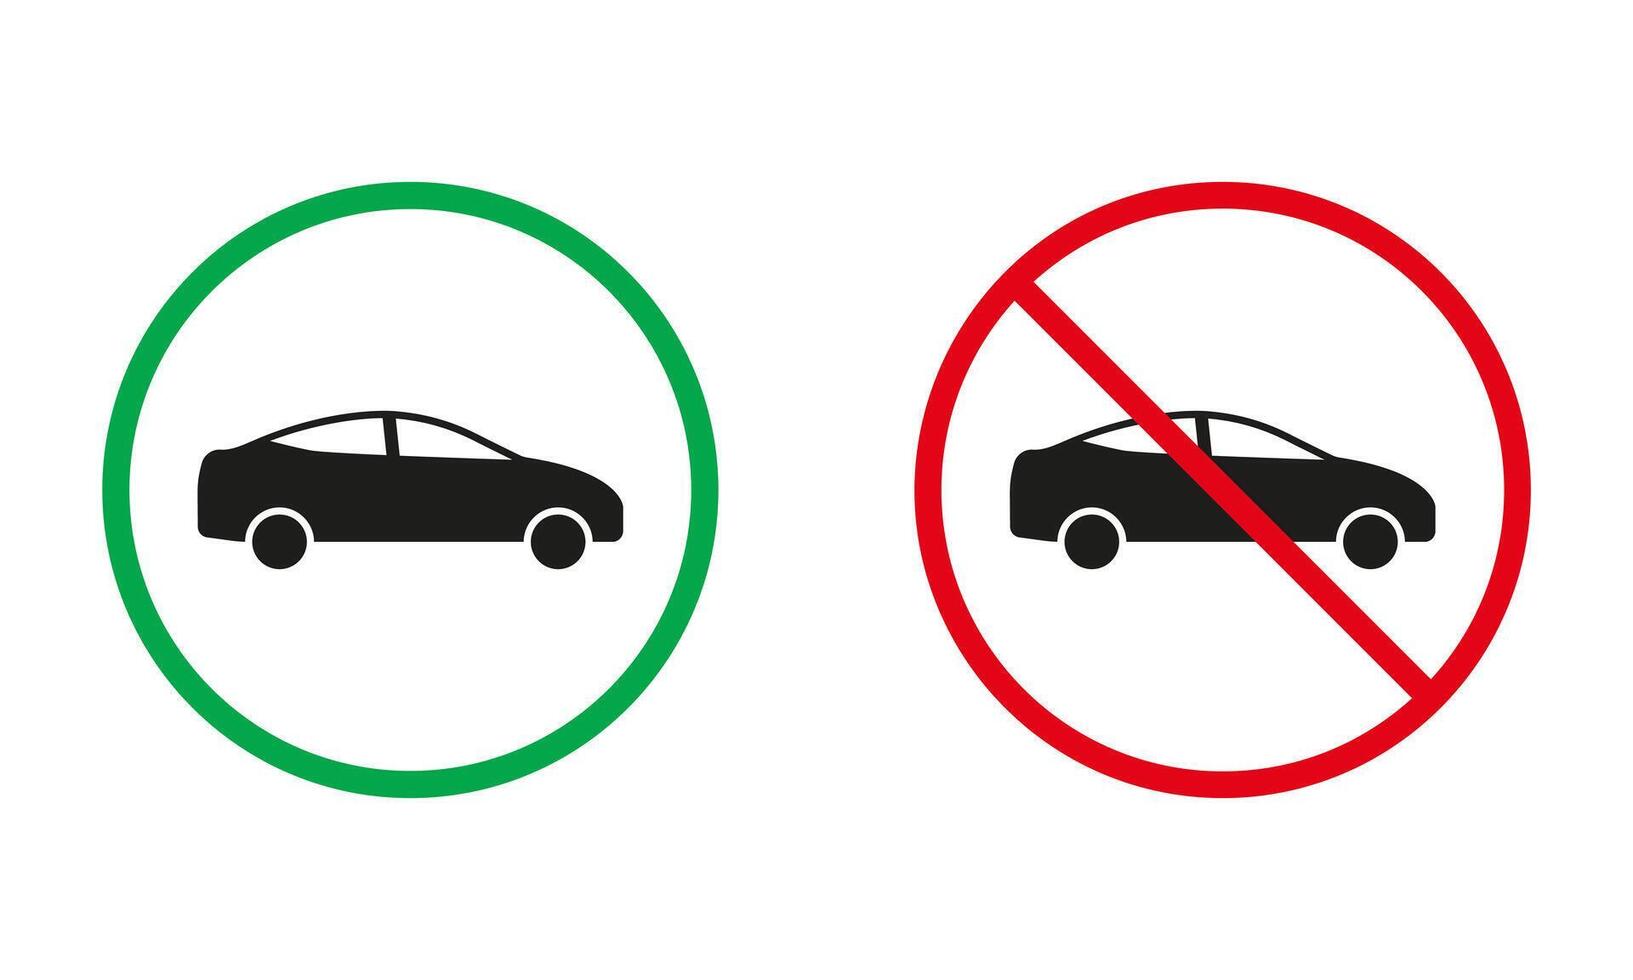 Vehicle Transport Warning Signs. Car Auto Silhouette Icons Set. Transportation Allowed and Prohibited Symbols. Isolated Vector Illustration